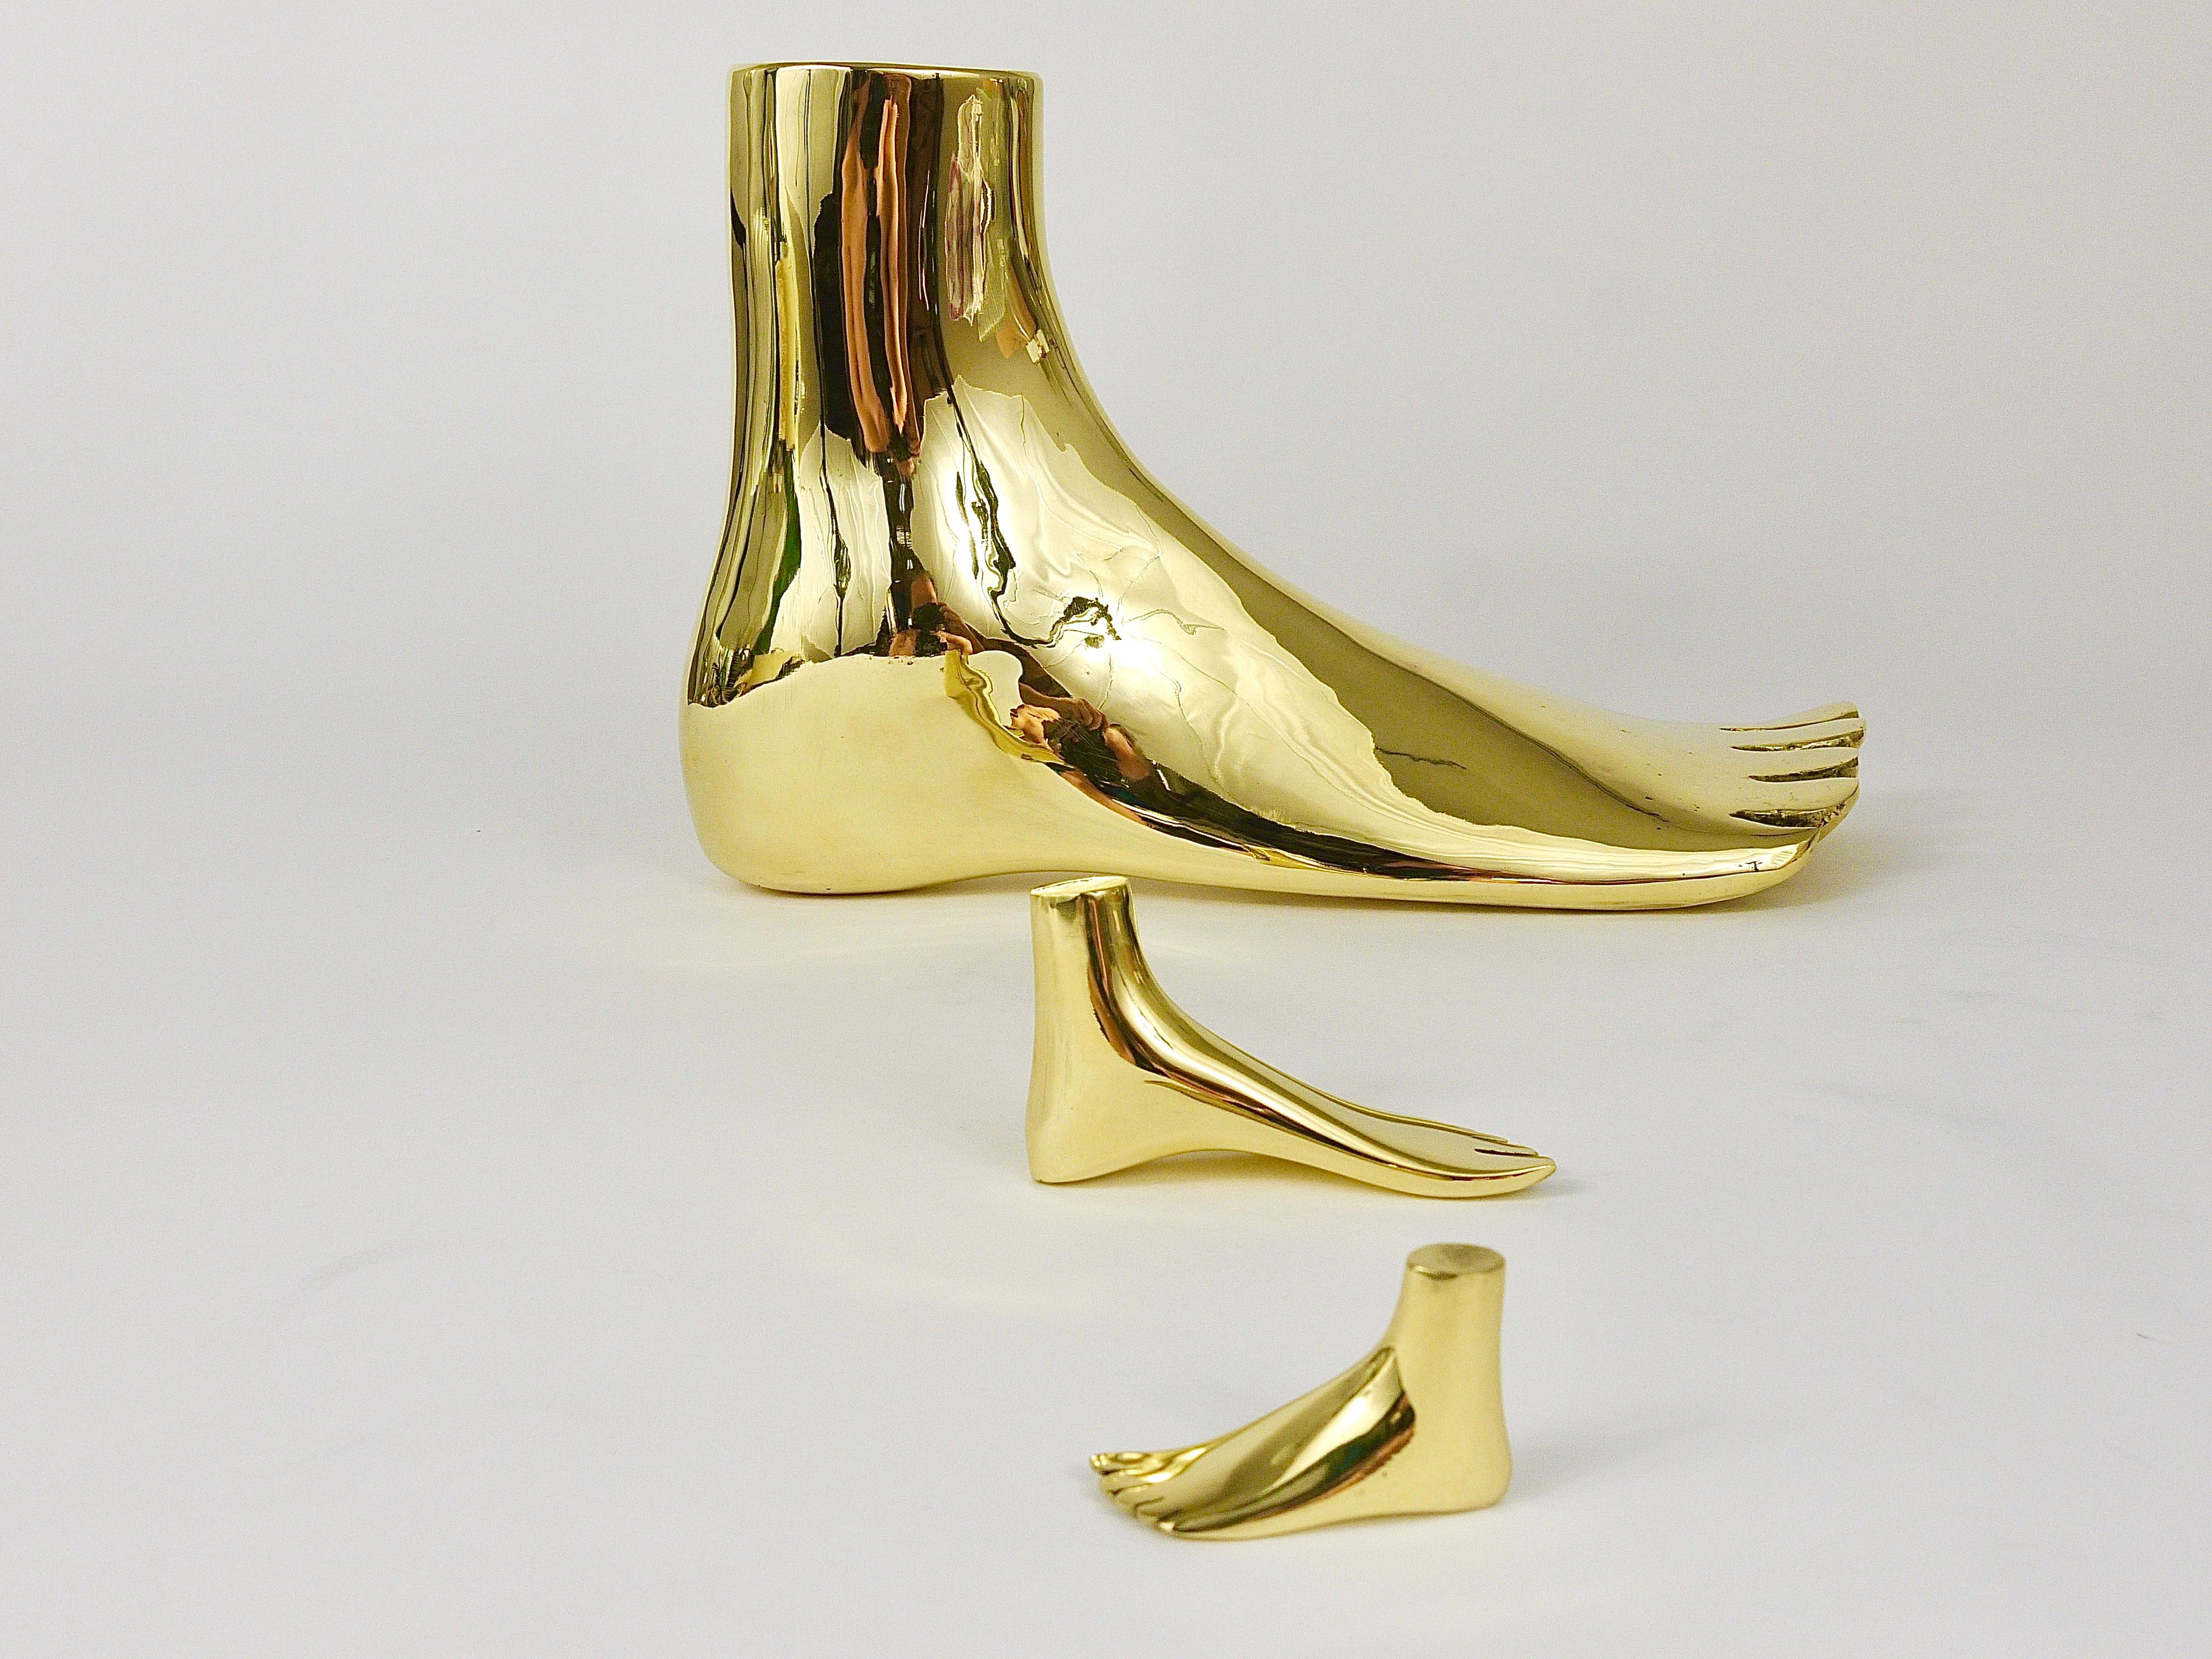 A charming modernist paperweight in the shape of a foot, designed by Carl Auböck in the 1950s. 
Handmade of solid polished brass by Werkstätte Auböck in Austria. Fully stamped and marked.

This is a handcrafted object; each piece and finish will